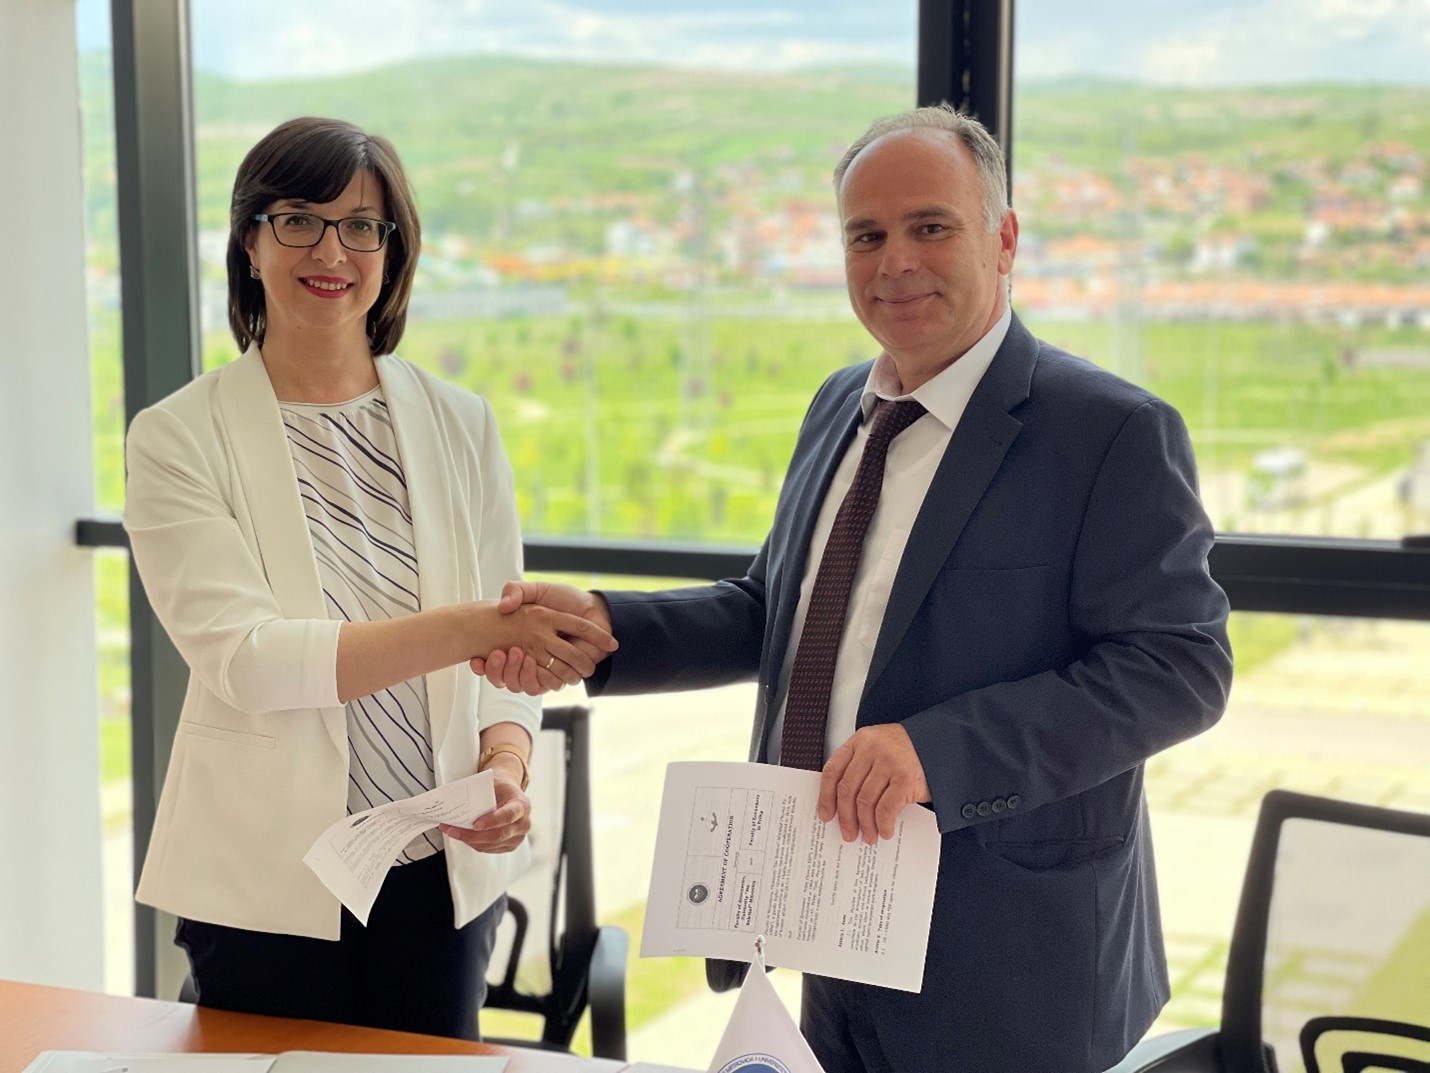 Cooperation Agreement Between Faculty Of Economics – UIBM And Faculty Of Economics – Prilep Of The University “Saint Kliment Ohridski” Bitola From North Macedonia